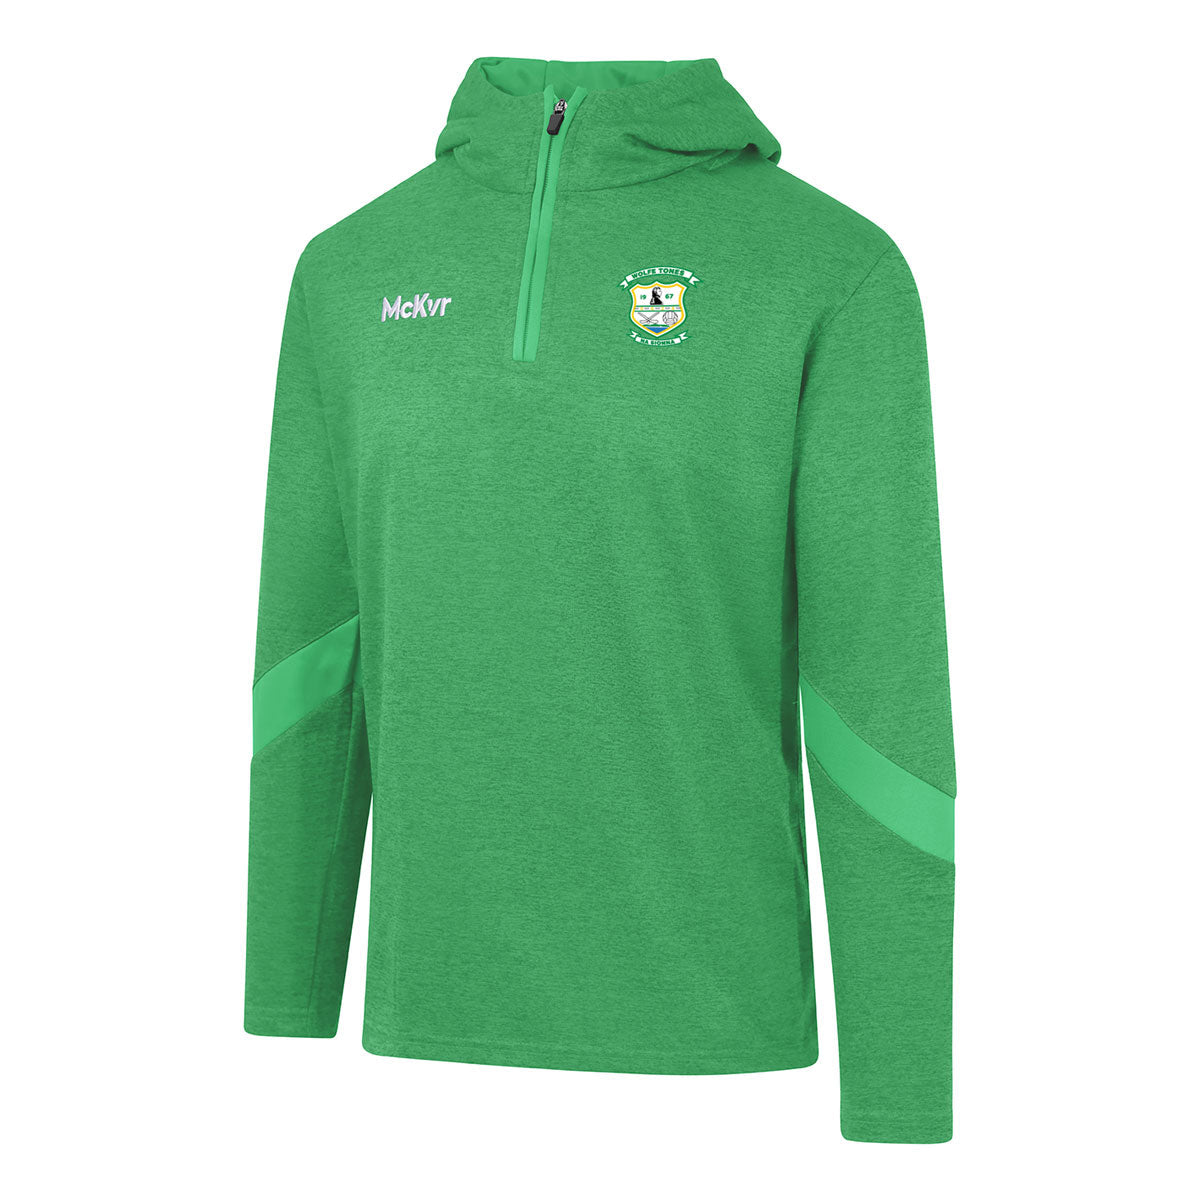 Mc Keever Wolfe Tones Na Sionna, Clare Core 22 1/4 Zip Hoodie - Adult - Green